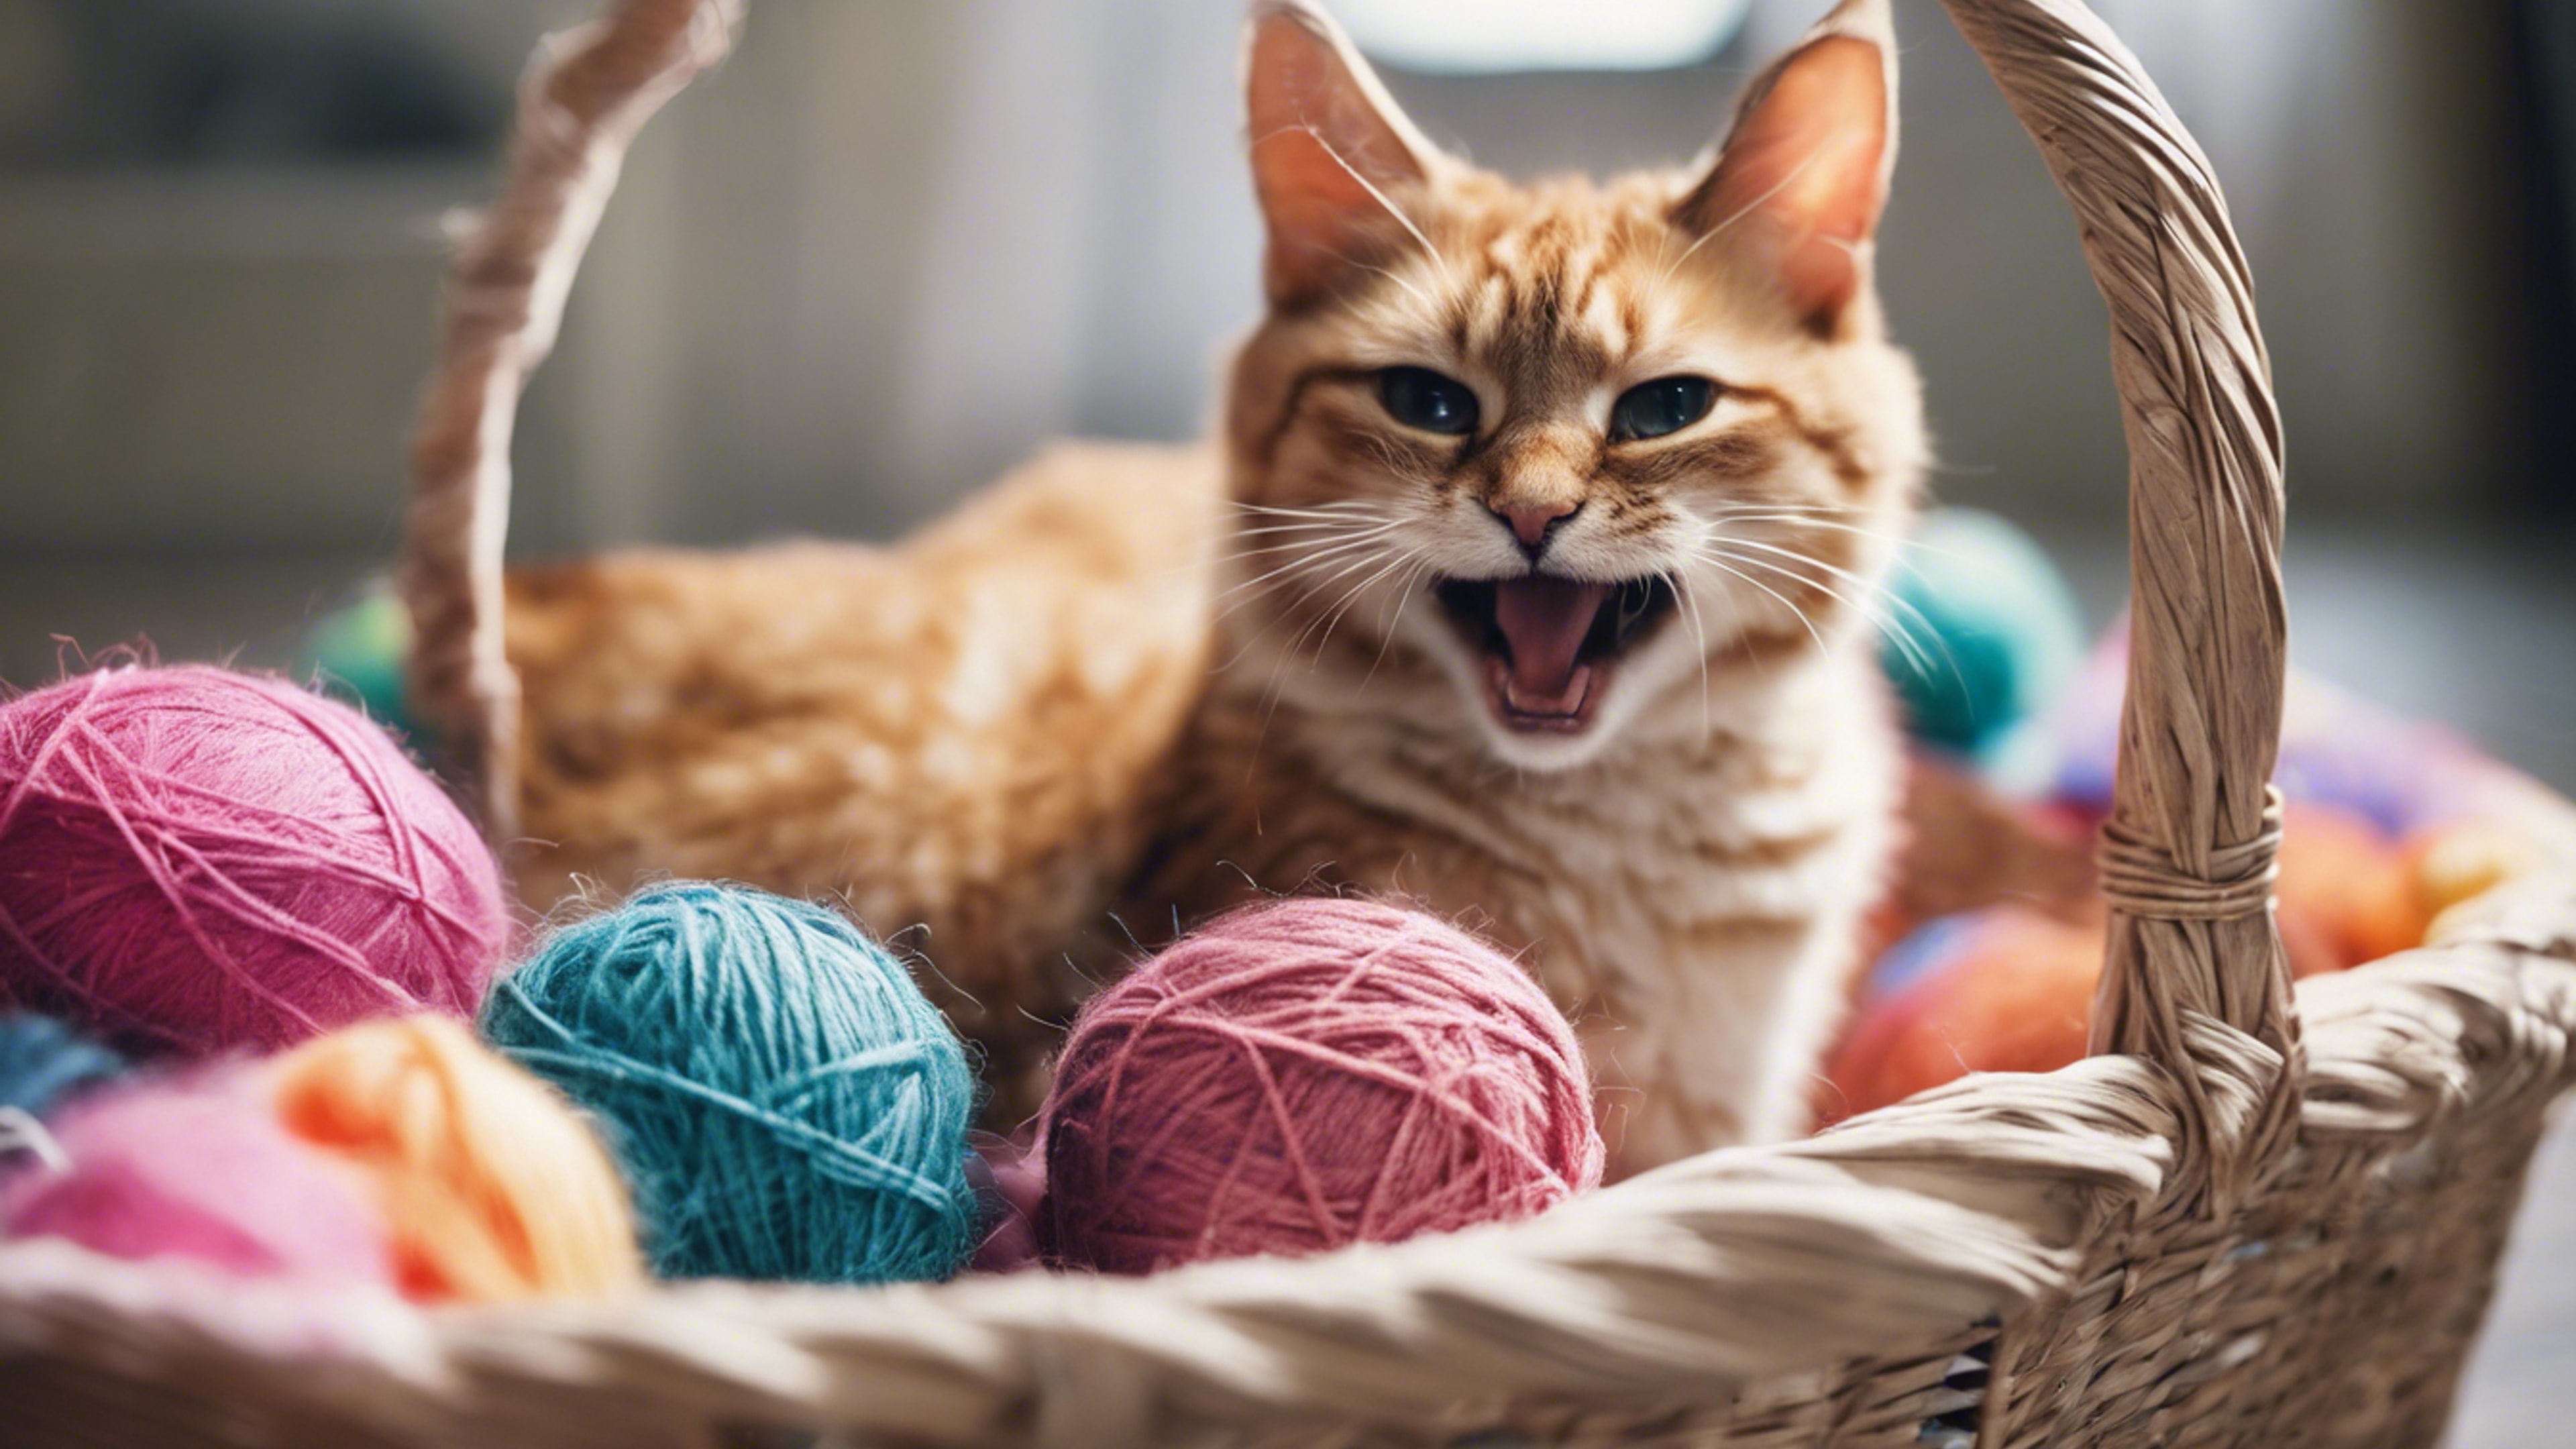 A cat mid-yawn in a basket filled with soft, colorful balls of yarn. Tapeta na zeď[4de2b2f4a75d42f7bbf8]